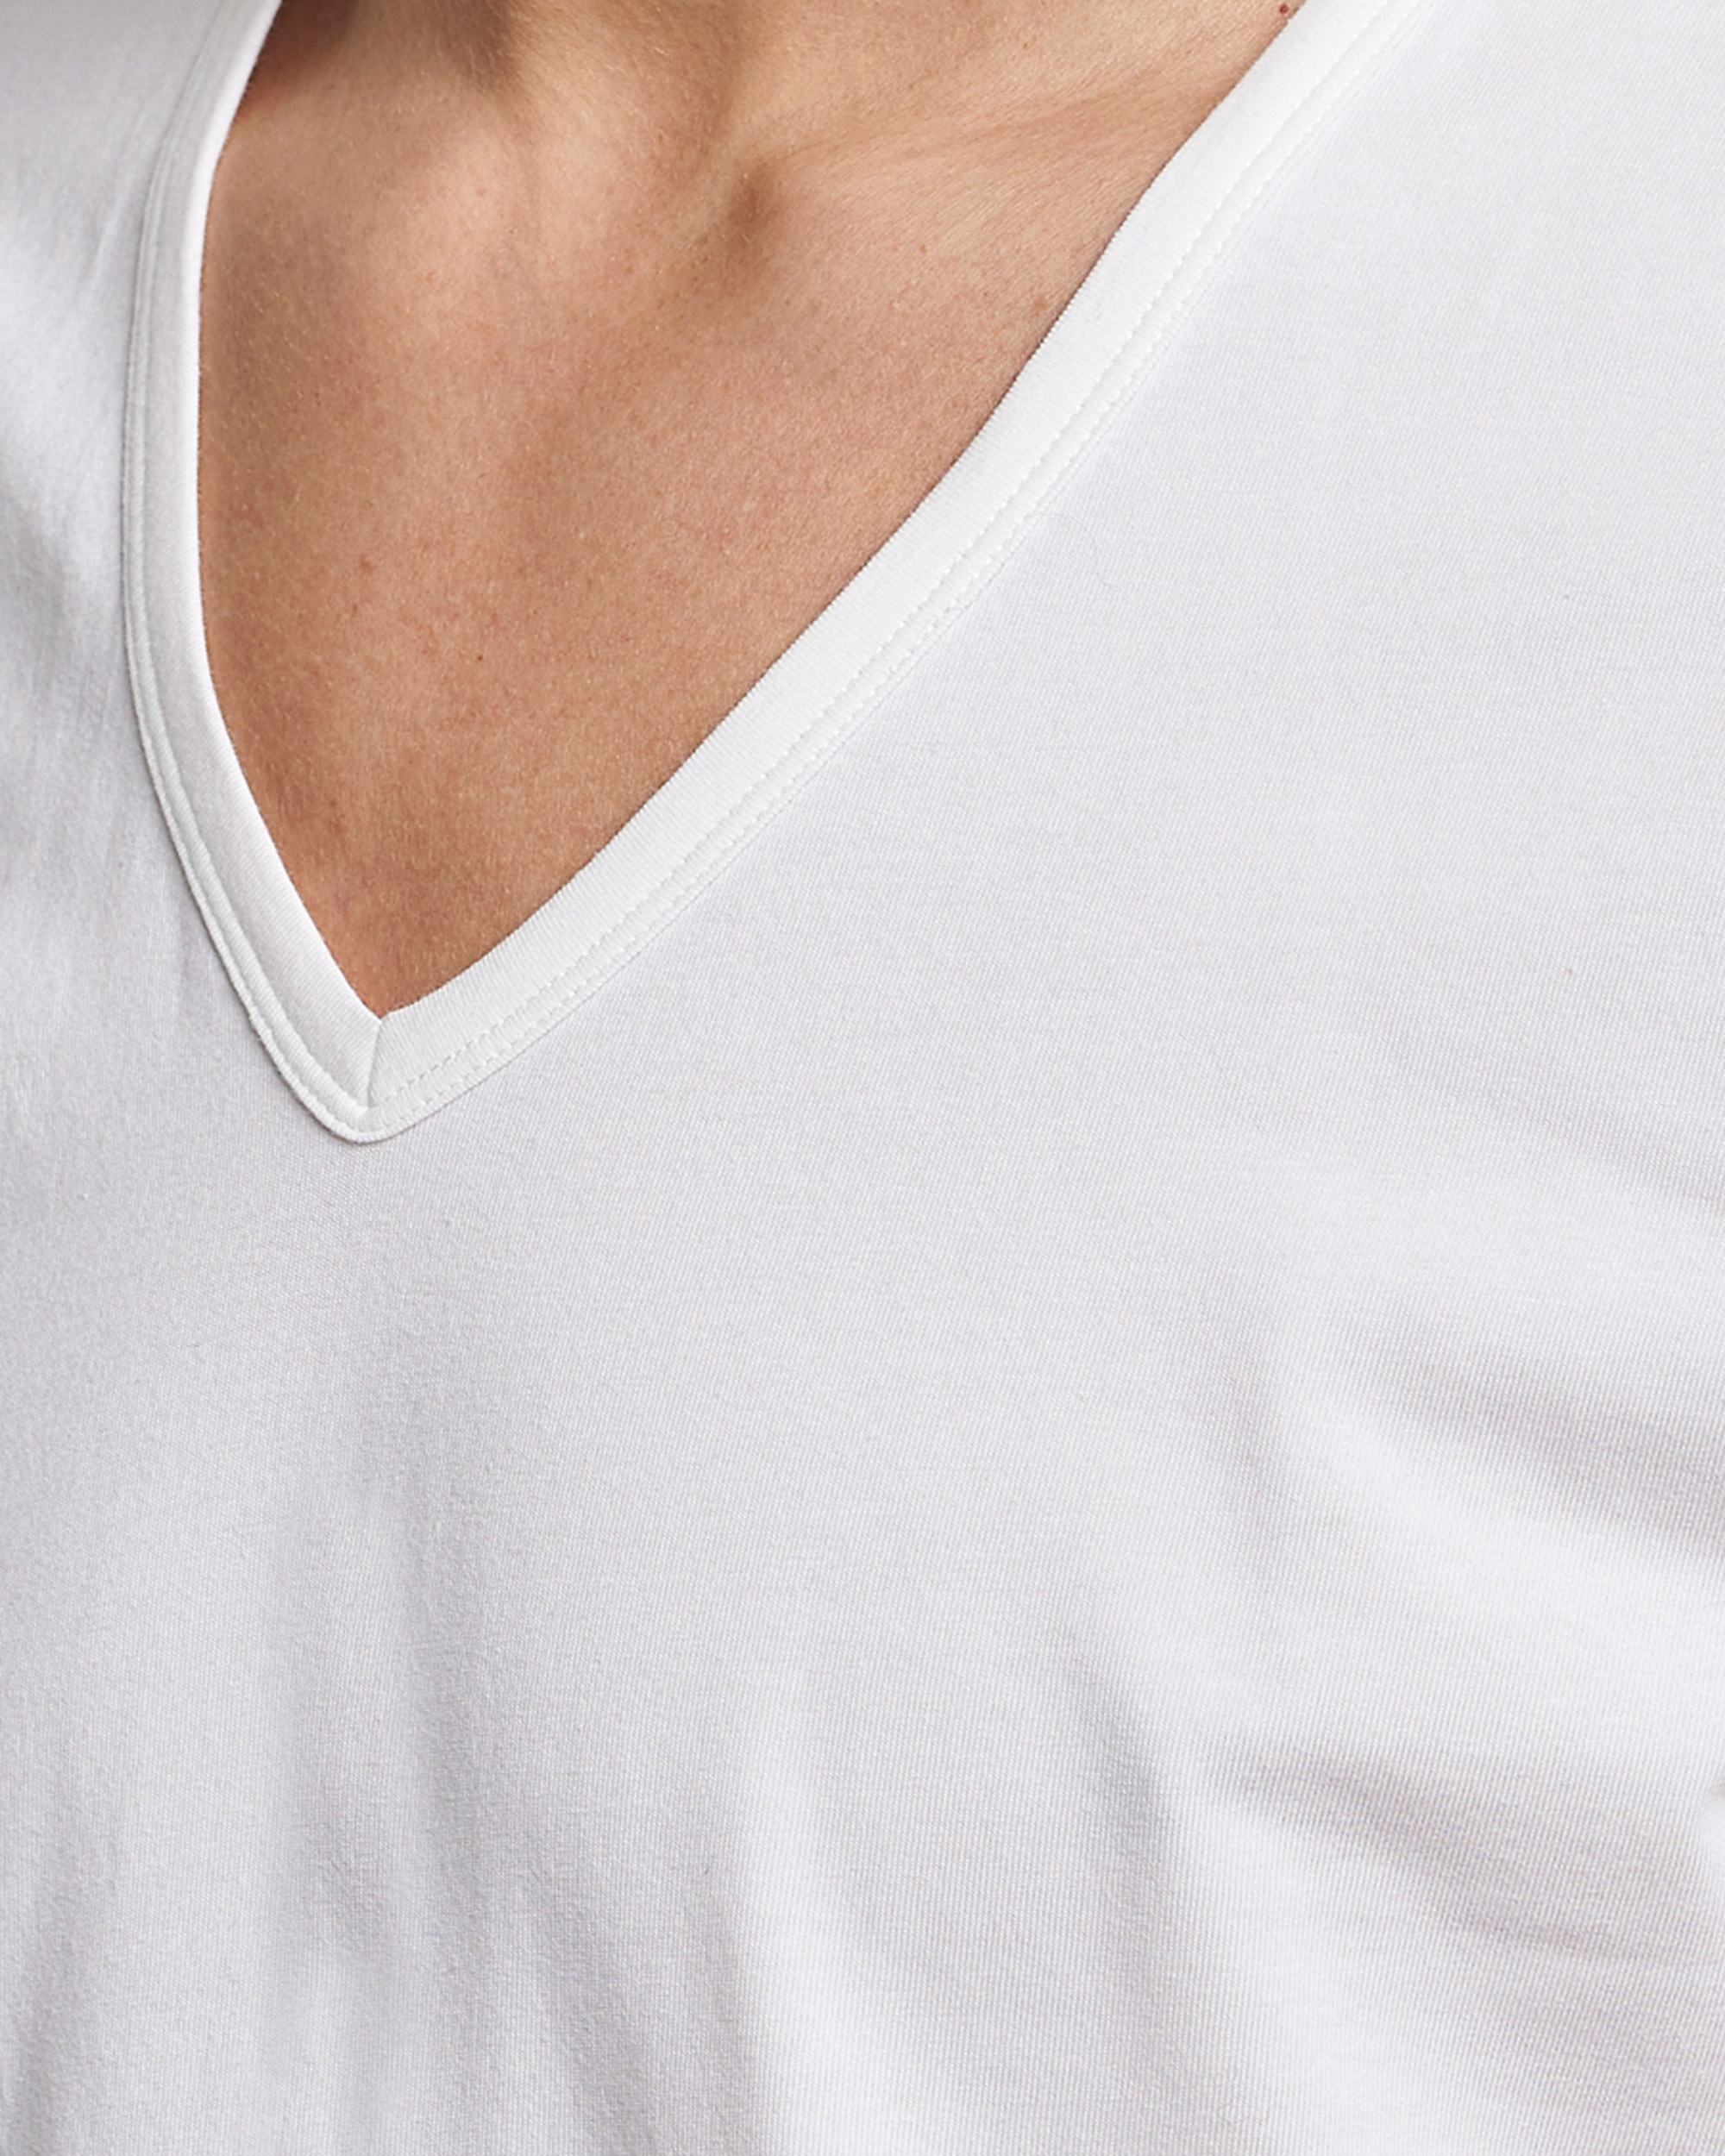 White of Carl bei Care Cotton Calvin Klein V-Neck Tee 2-Pack